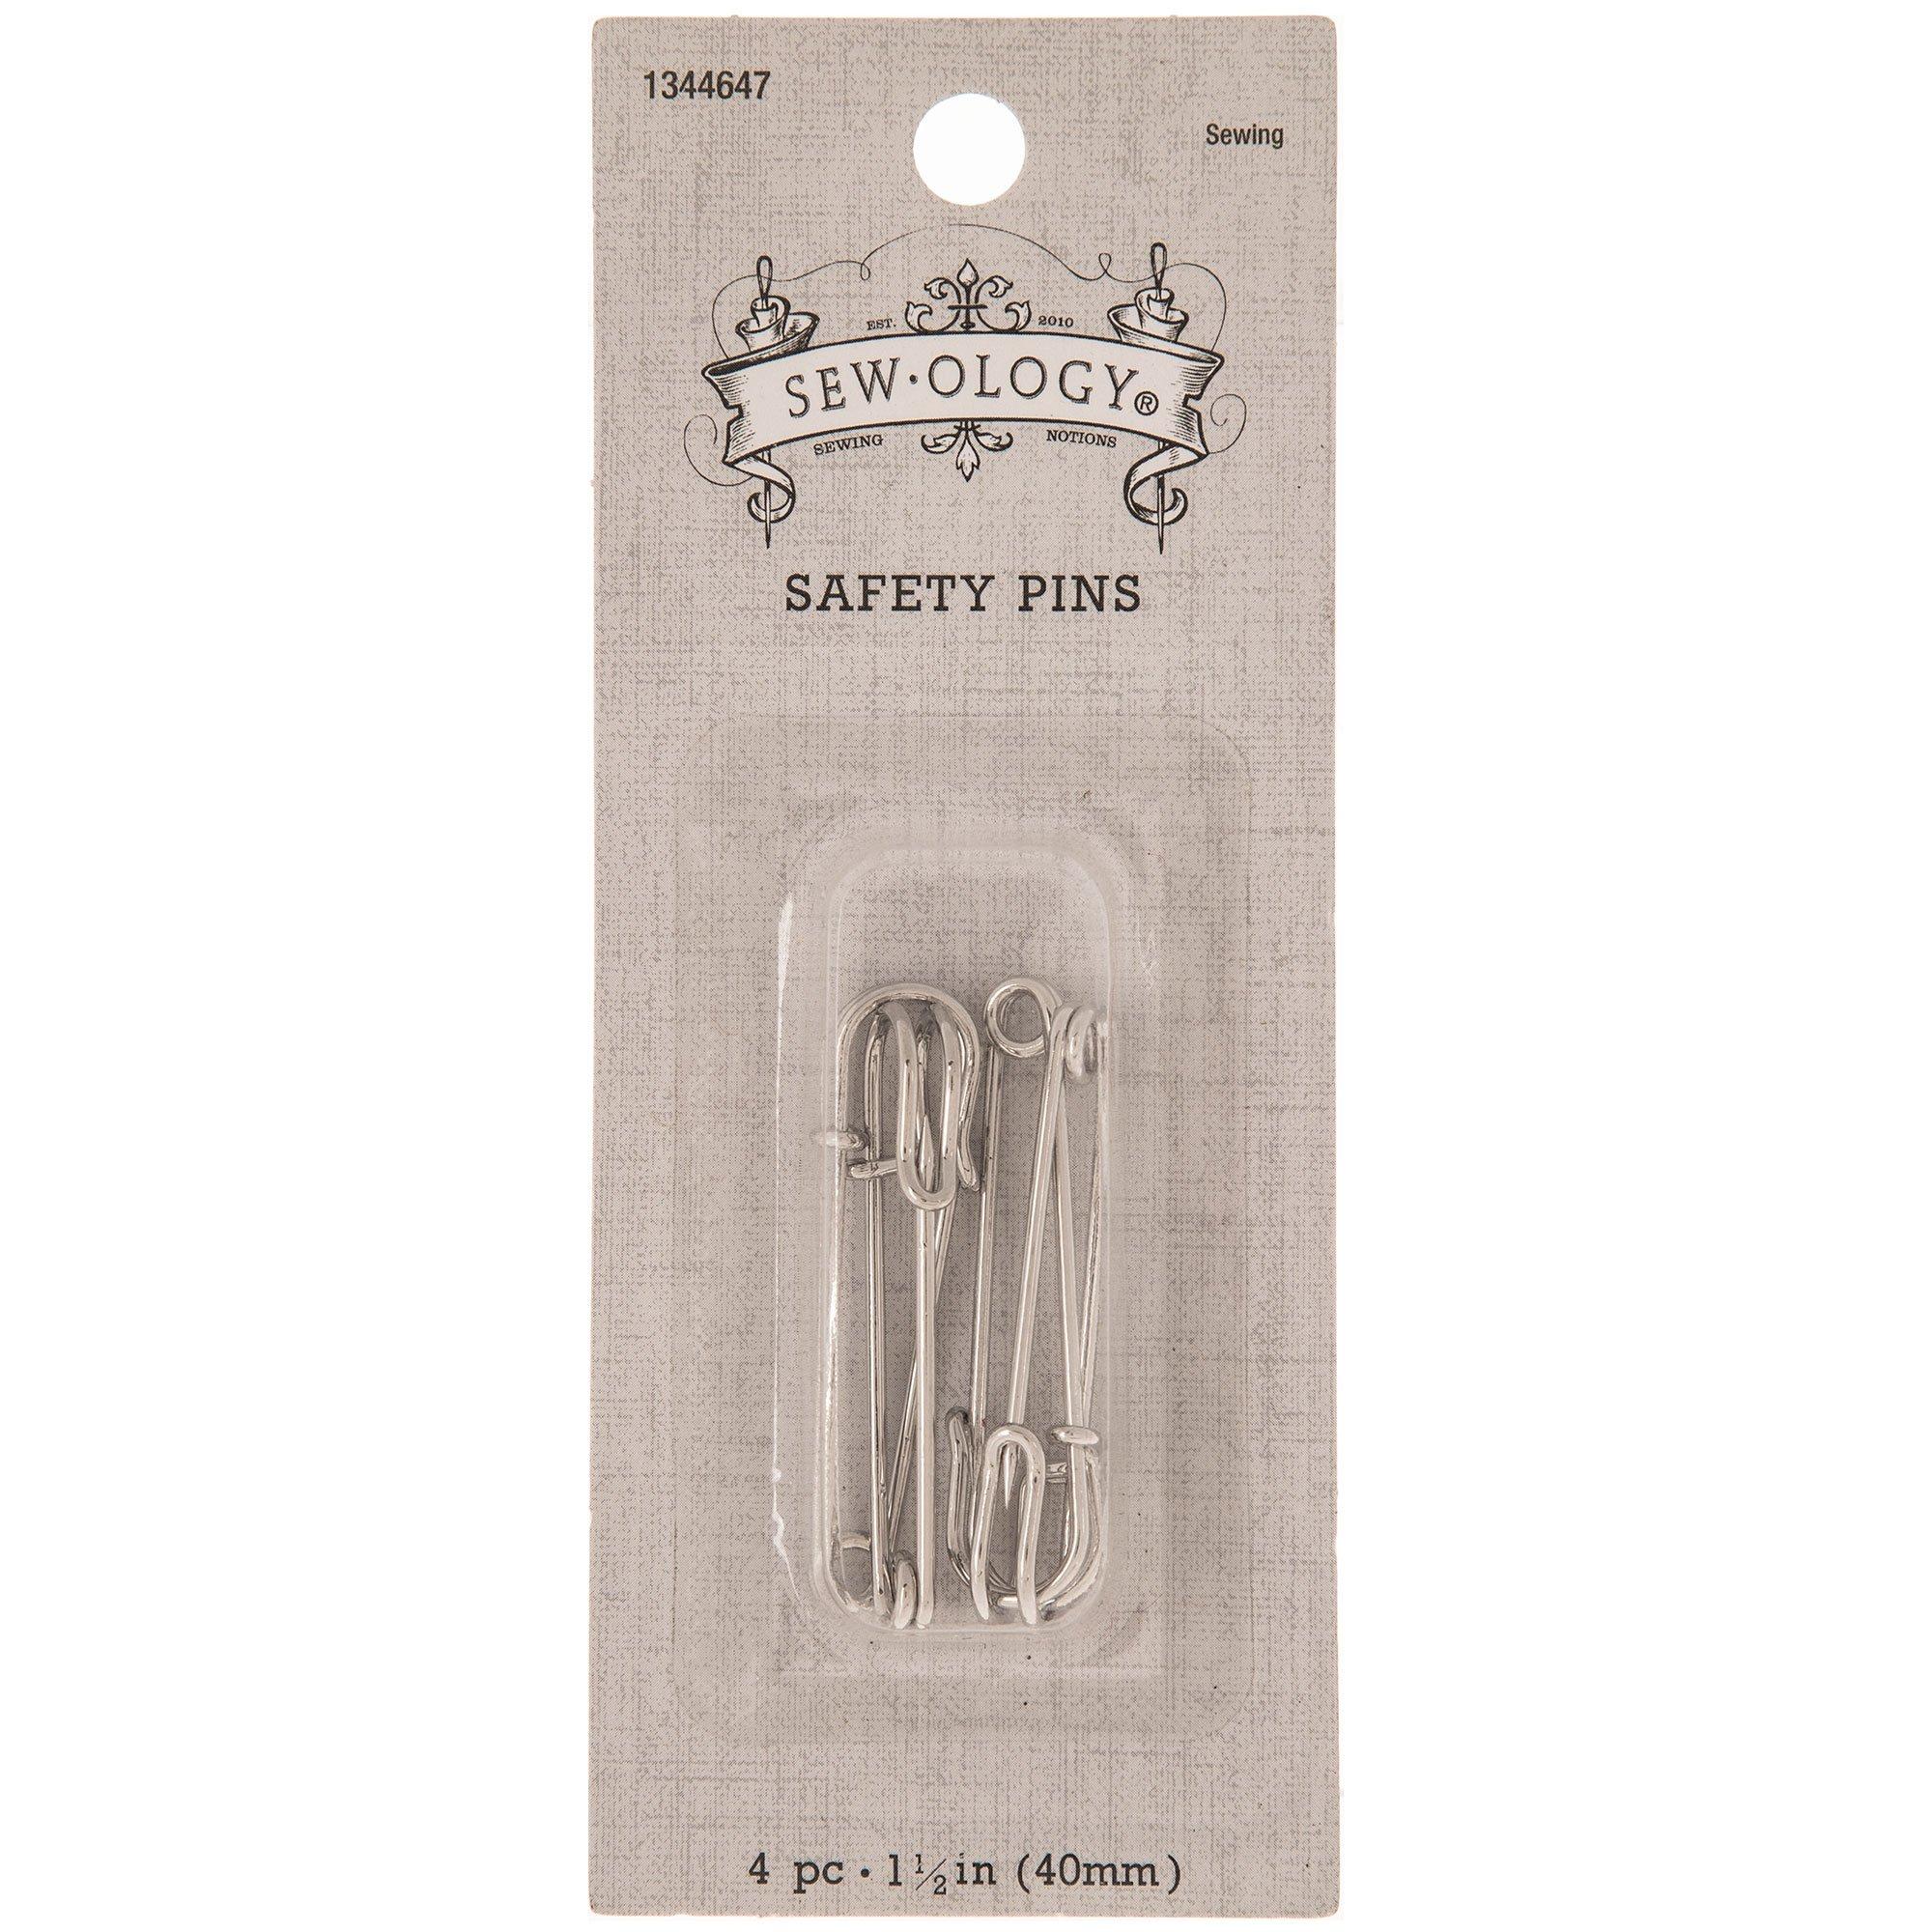 Gold Tone Safety Pins - 60mm x 16mm - 2 Pieces - Z946